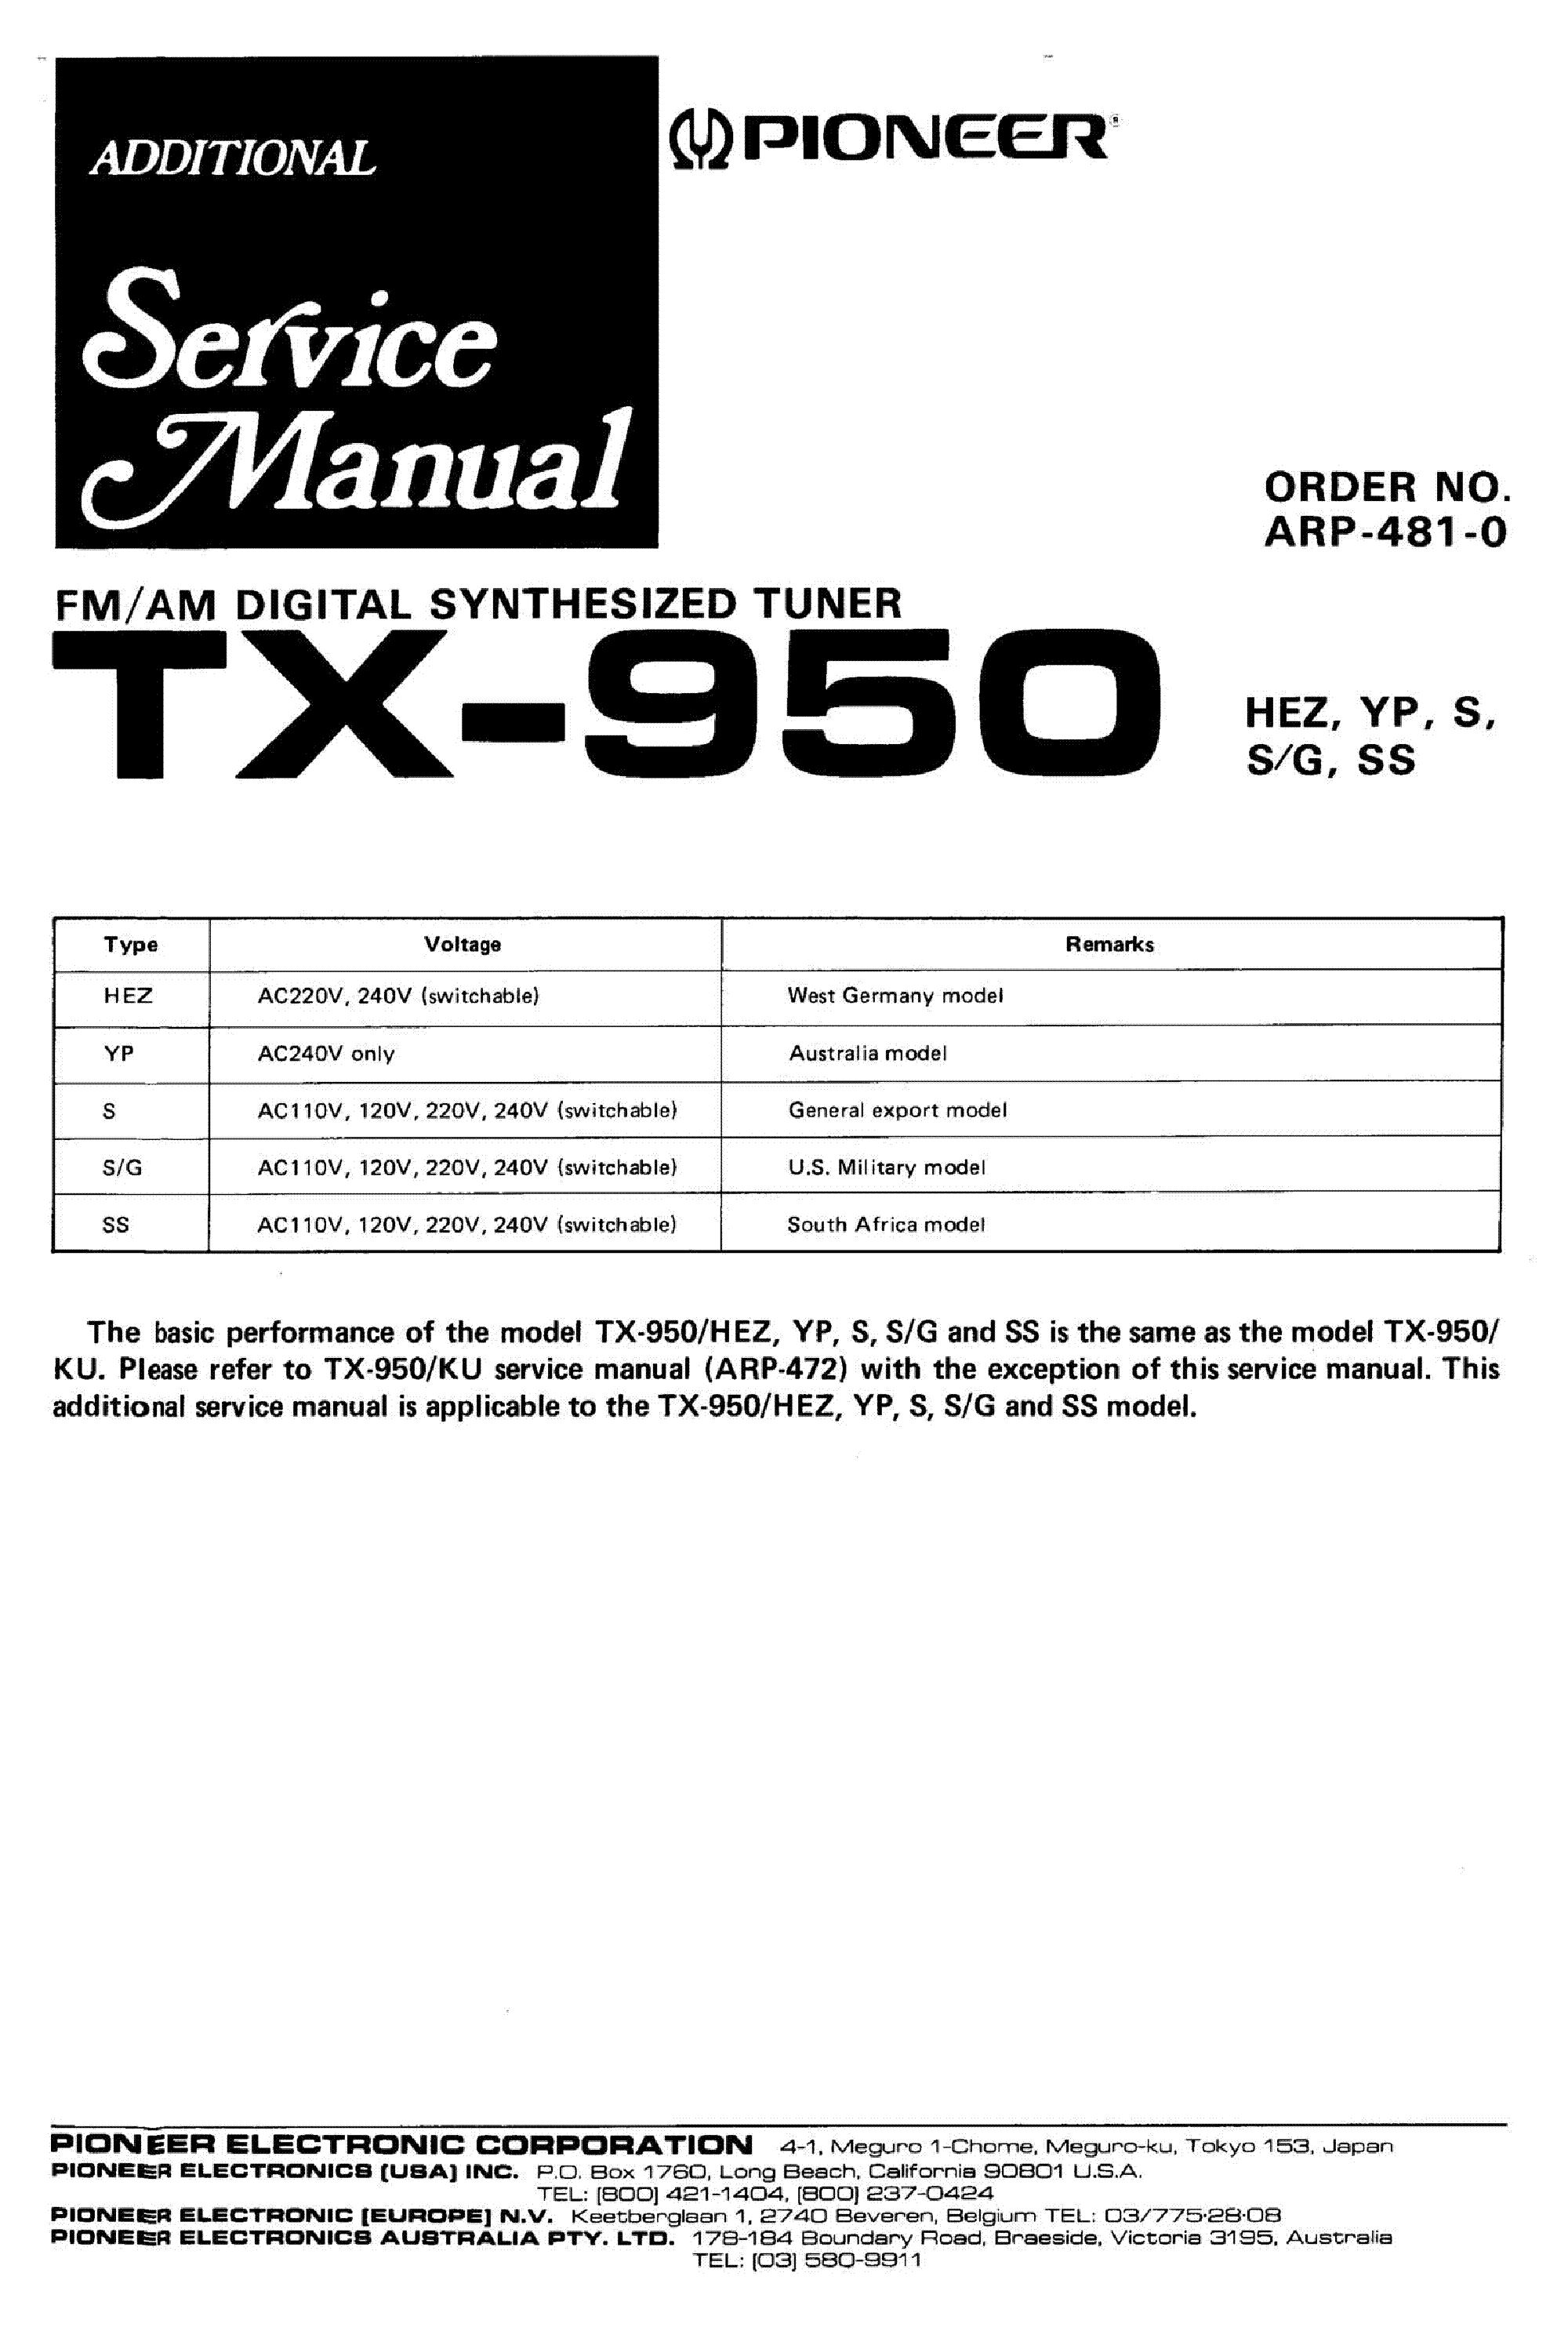 PIONEER TX-950 ARP-481-0 service manual (2nd page)